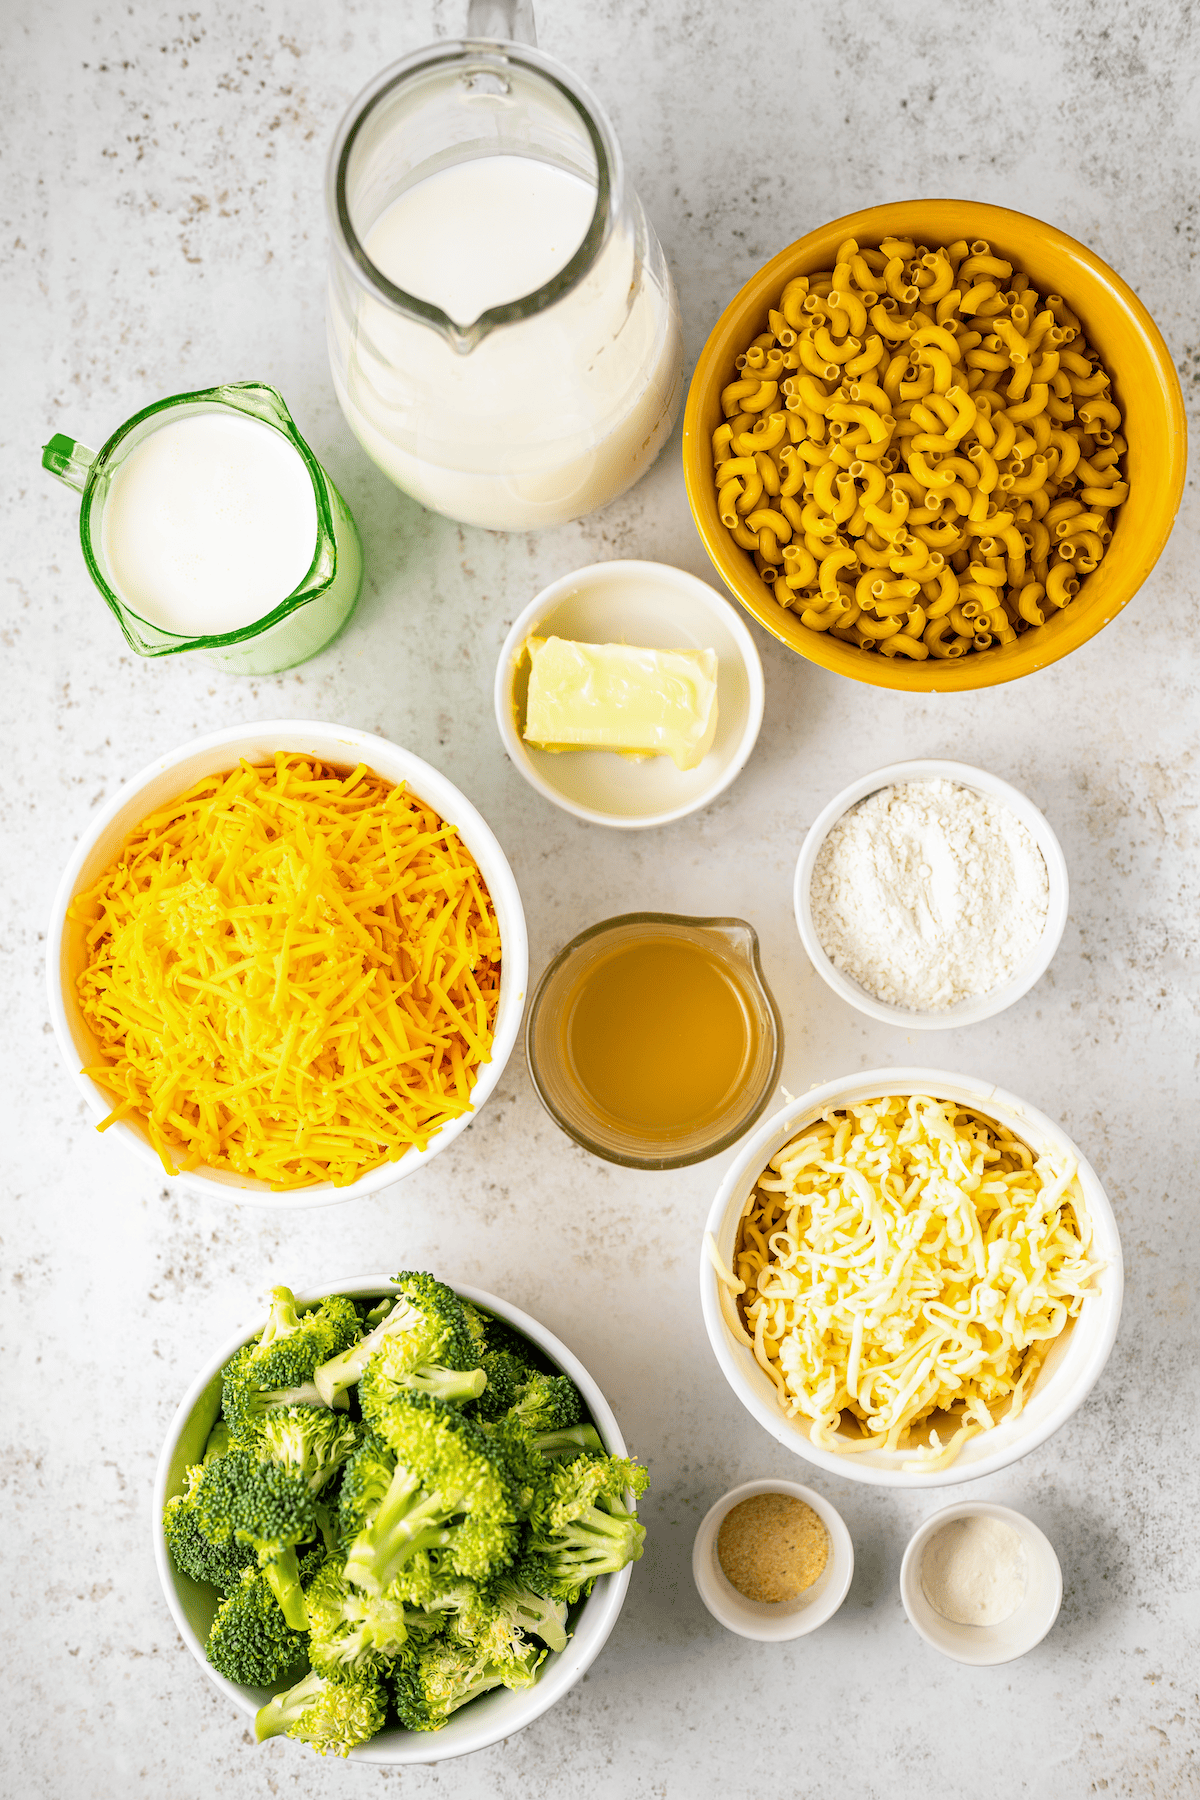 Ingredients for broccoli mac and cheese.